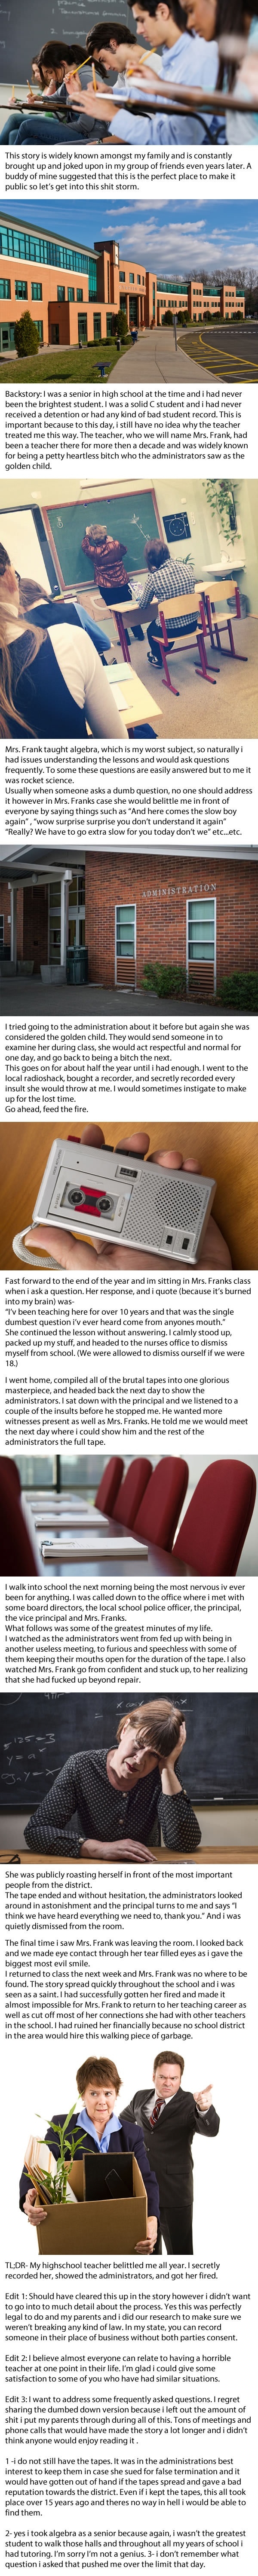 Teacher keeps insulting students